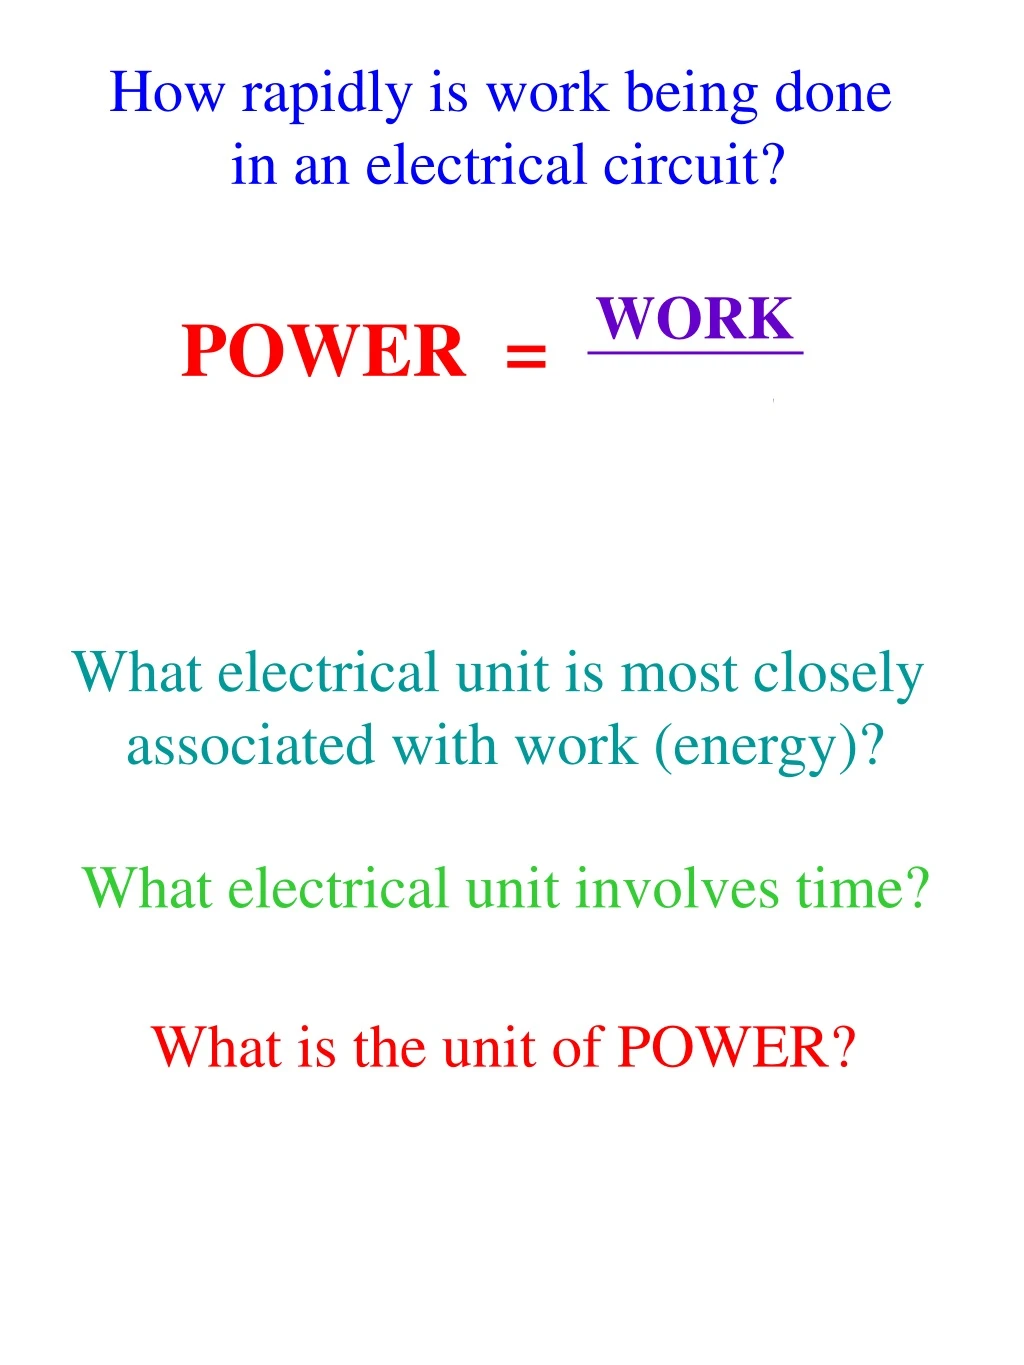 how rapidly is work being done in an electrical